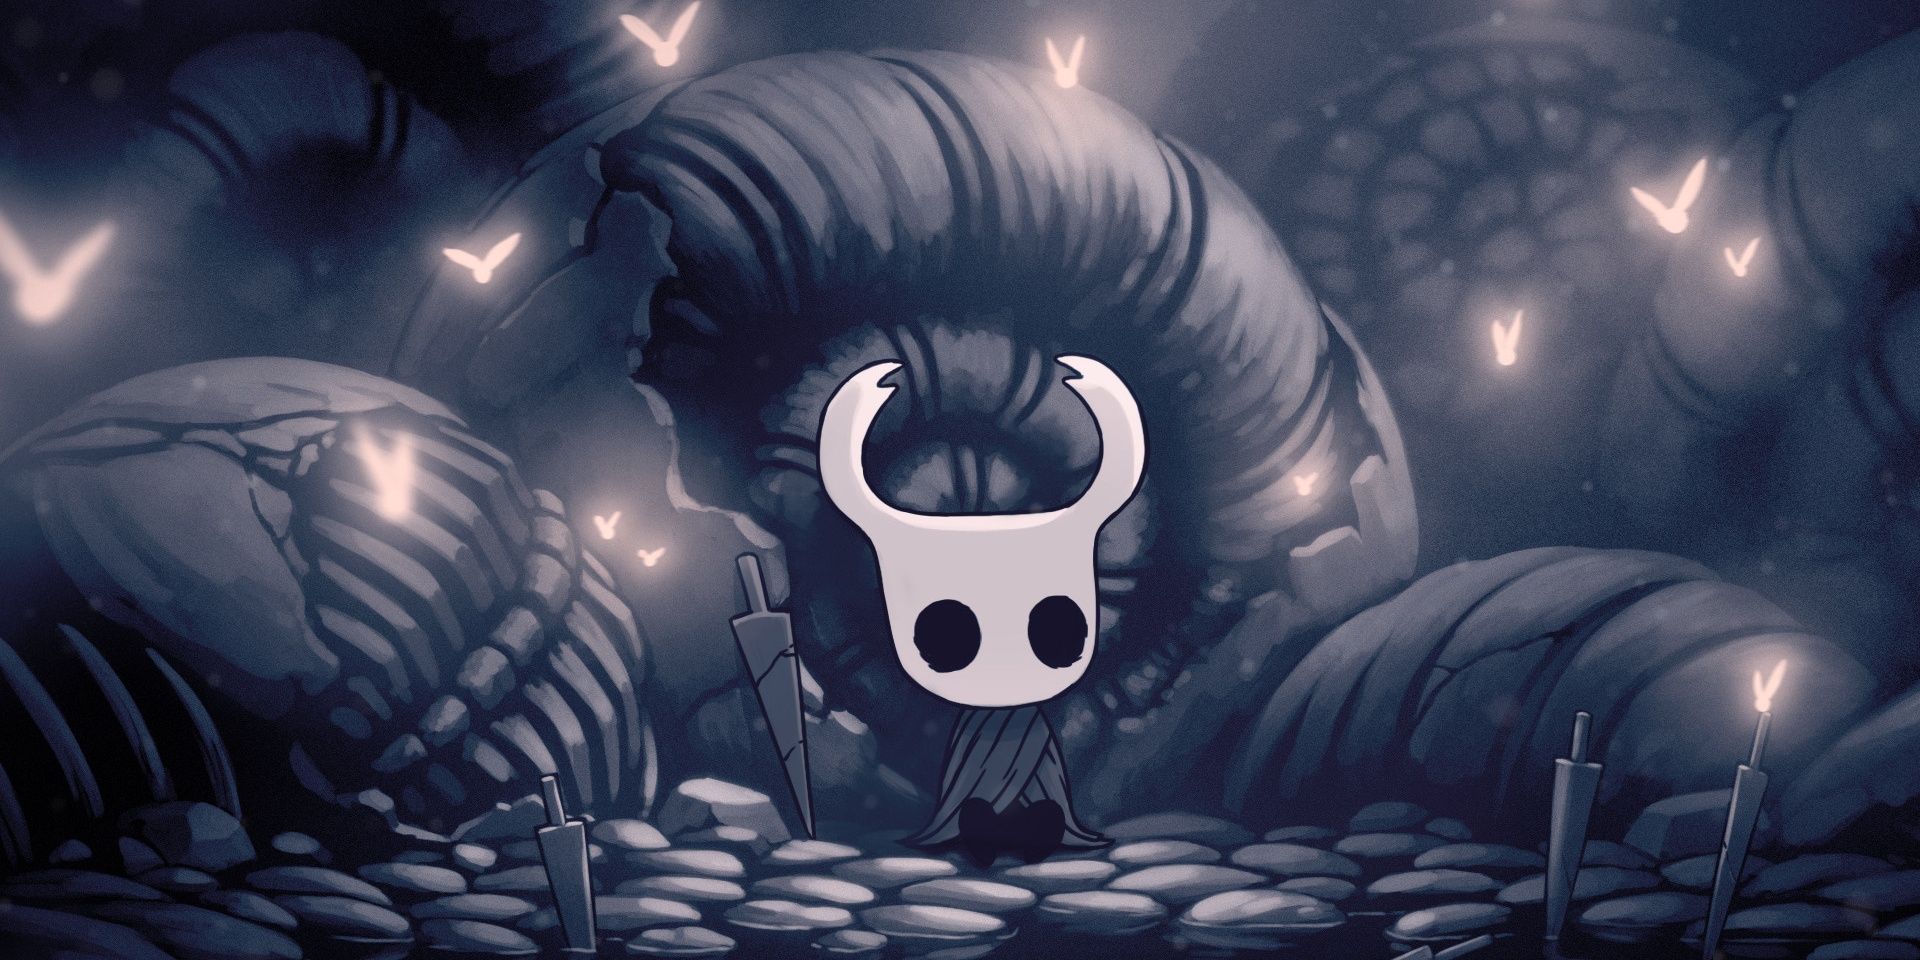 Hollow Knight sits alone surrounded by swords